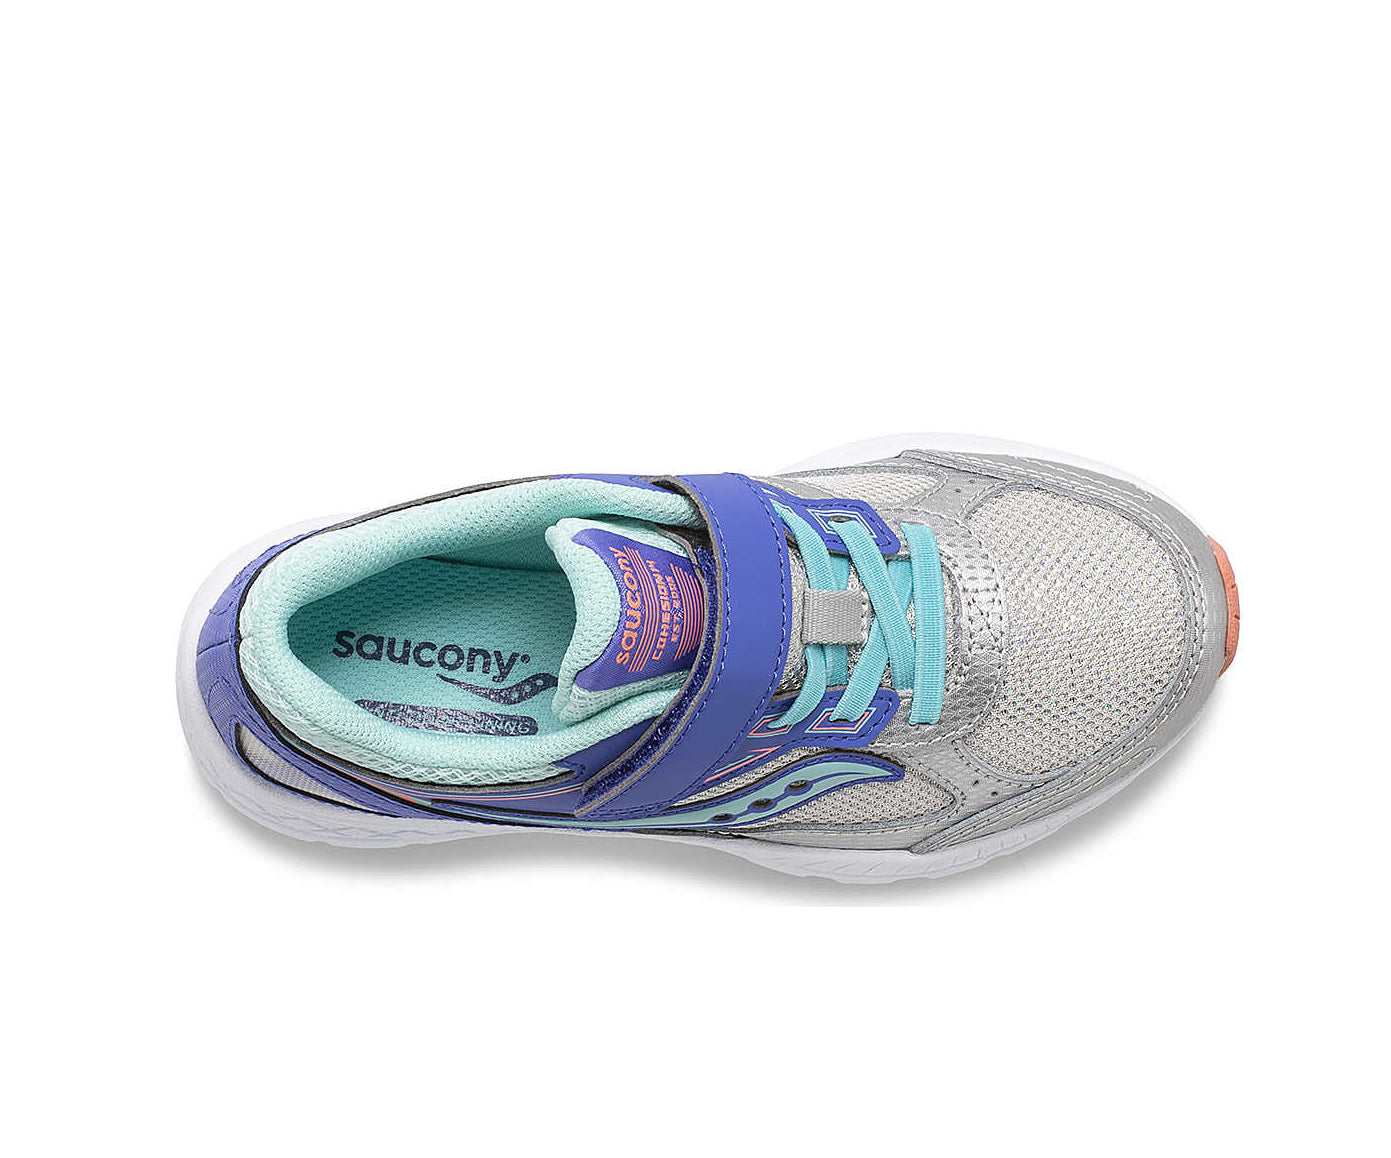 A silver and mint low-cut sneaker with indigo accents and a velcro strap.